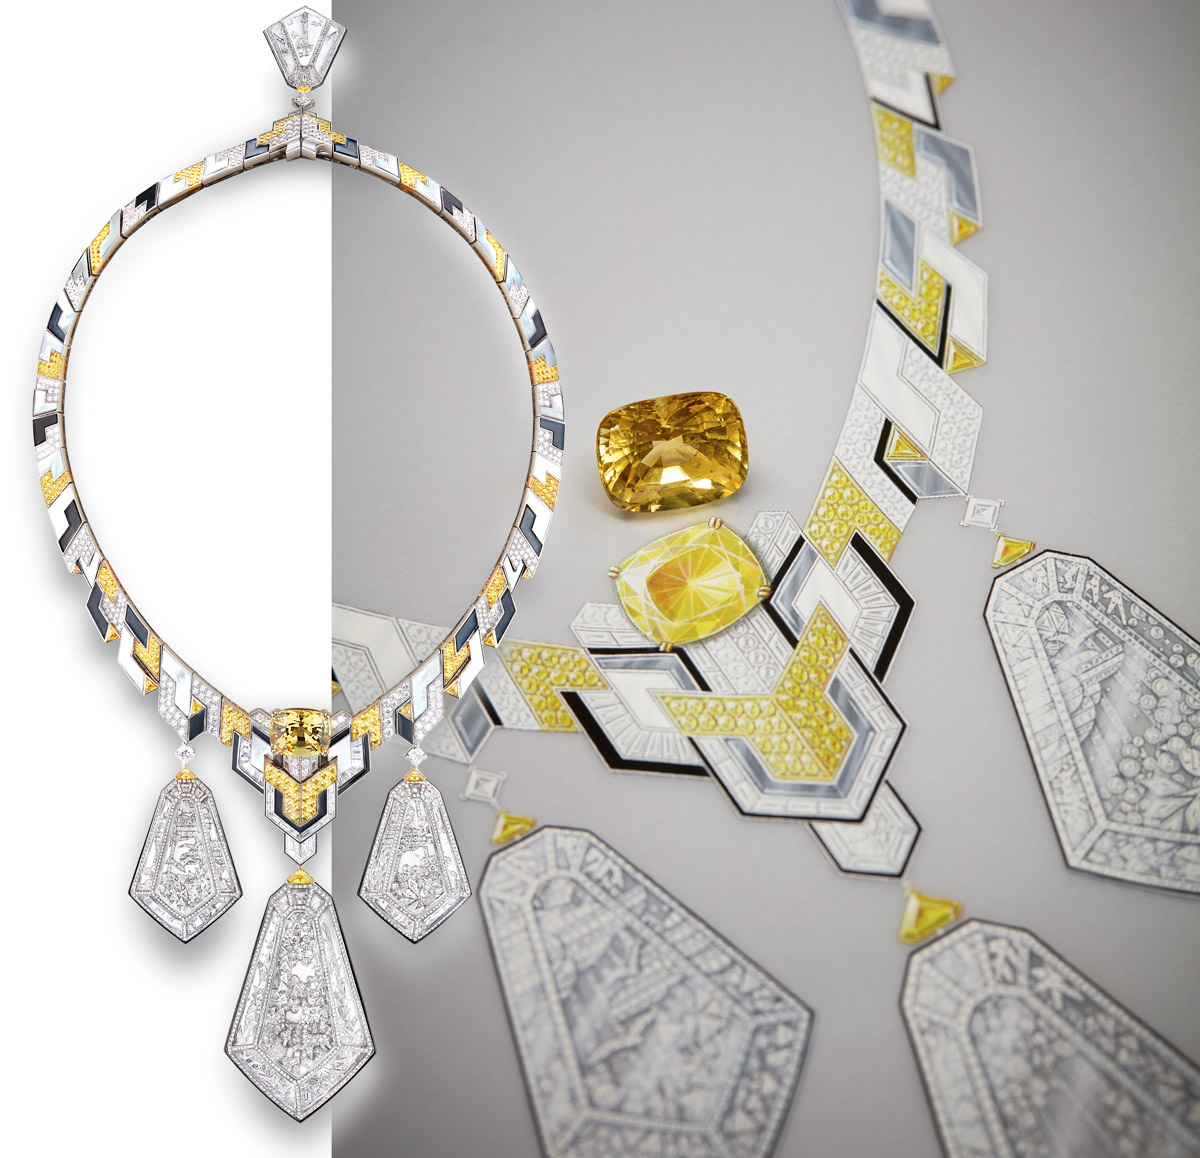 Boucheron Hotel Particulier necklace with a yellow sapphire, rock crystal, mother of pearl, onyx and diamonds